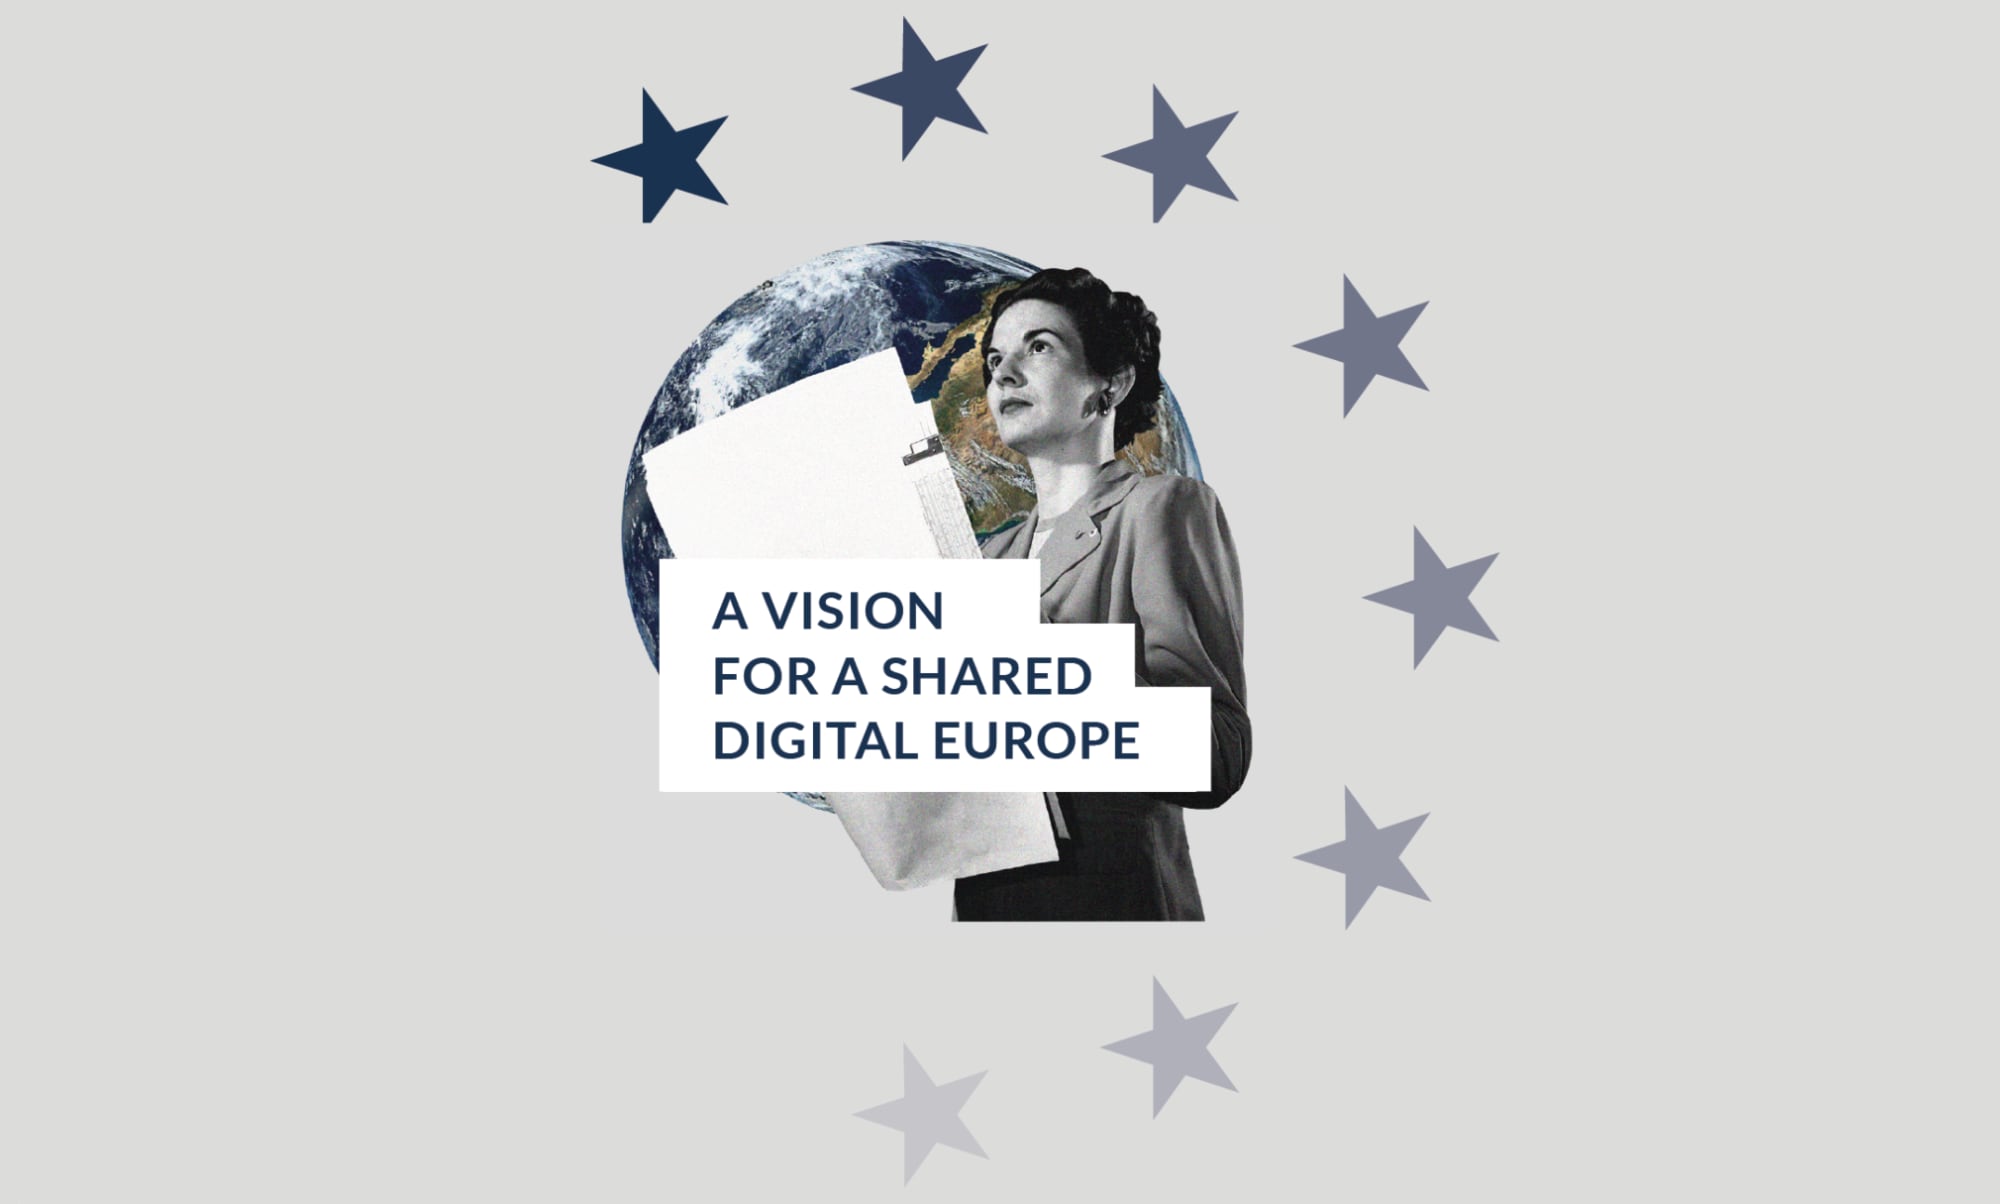 A Vision for a Shared Digital Europe